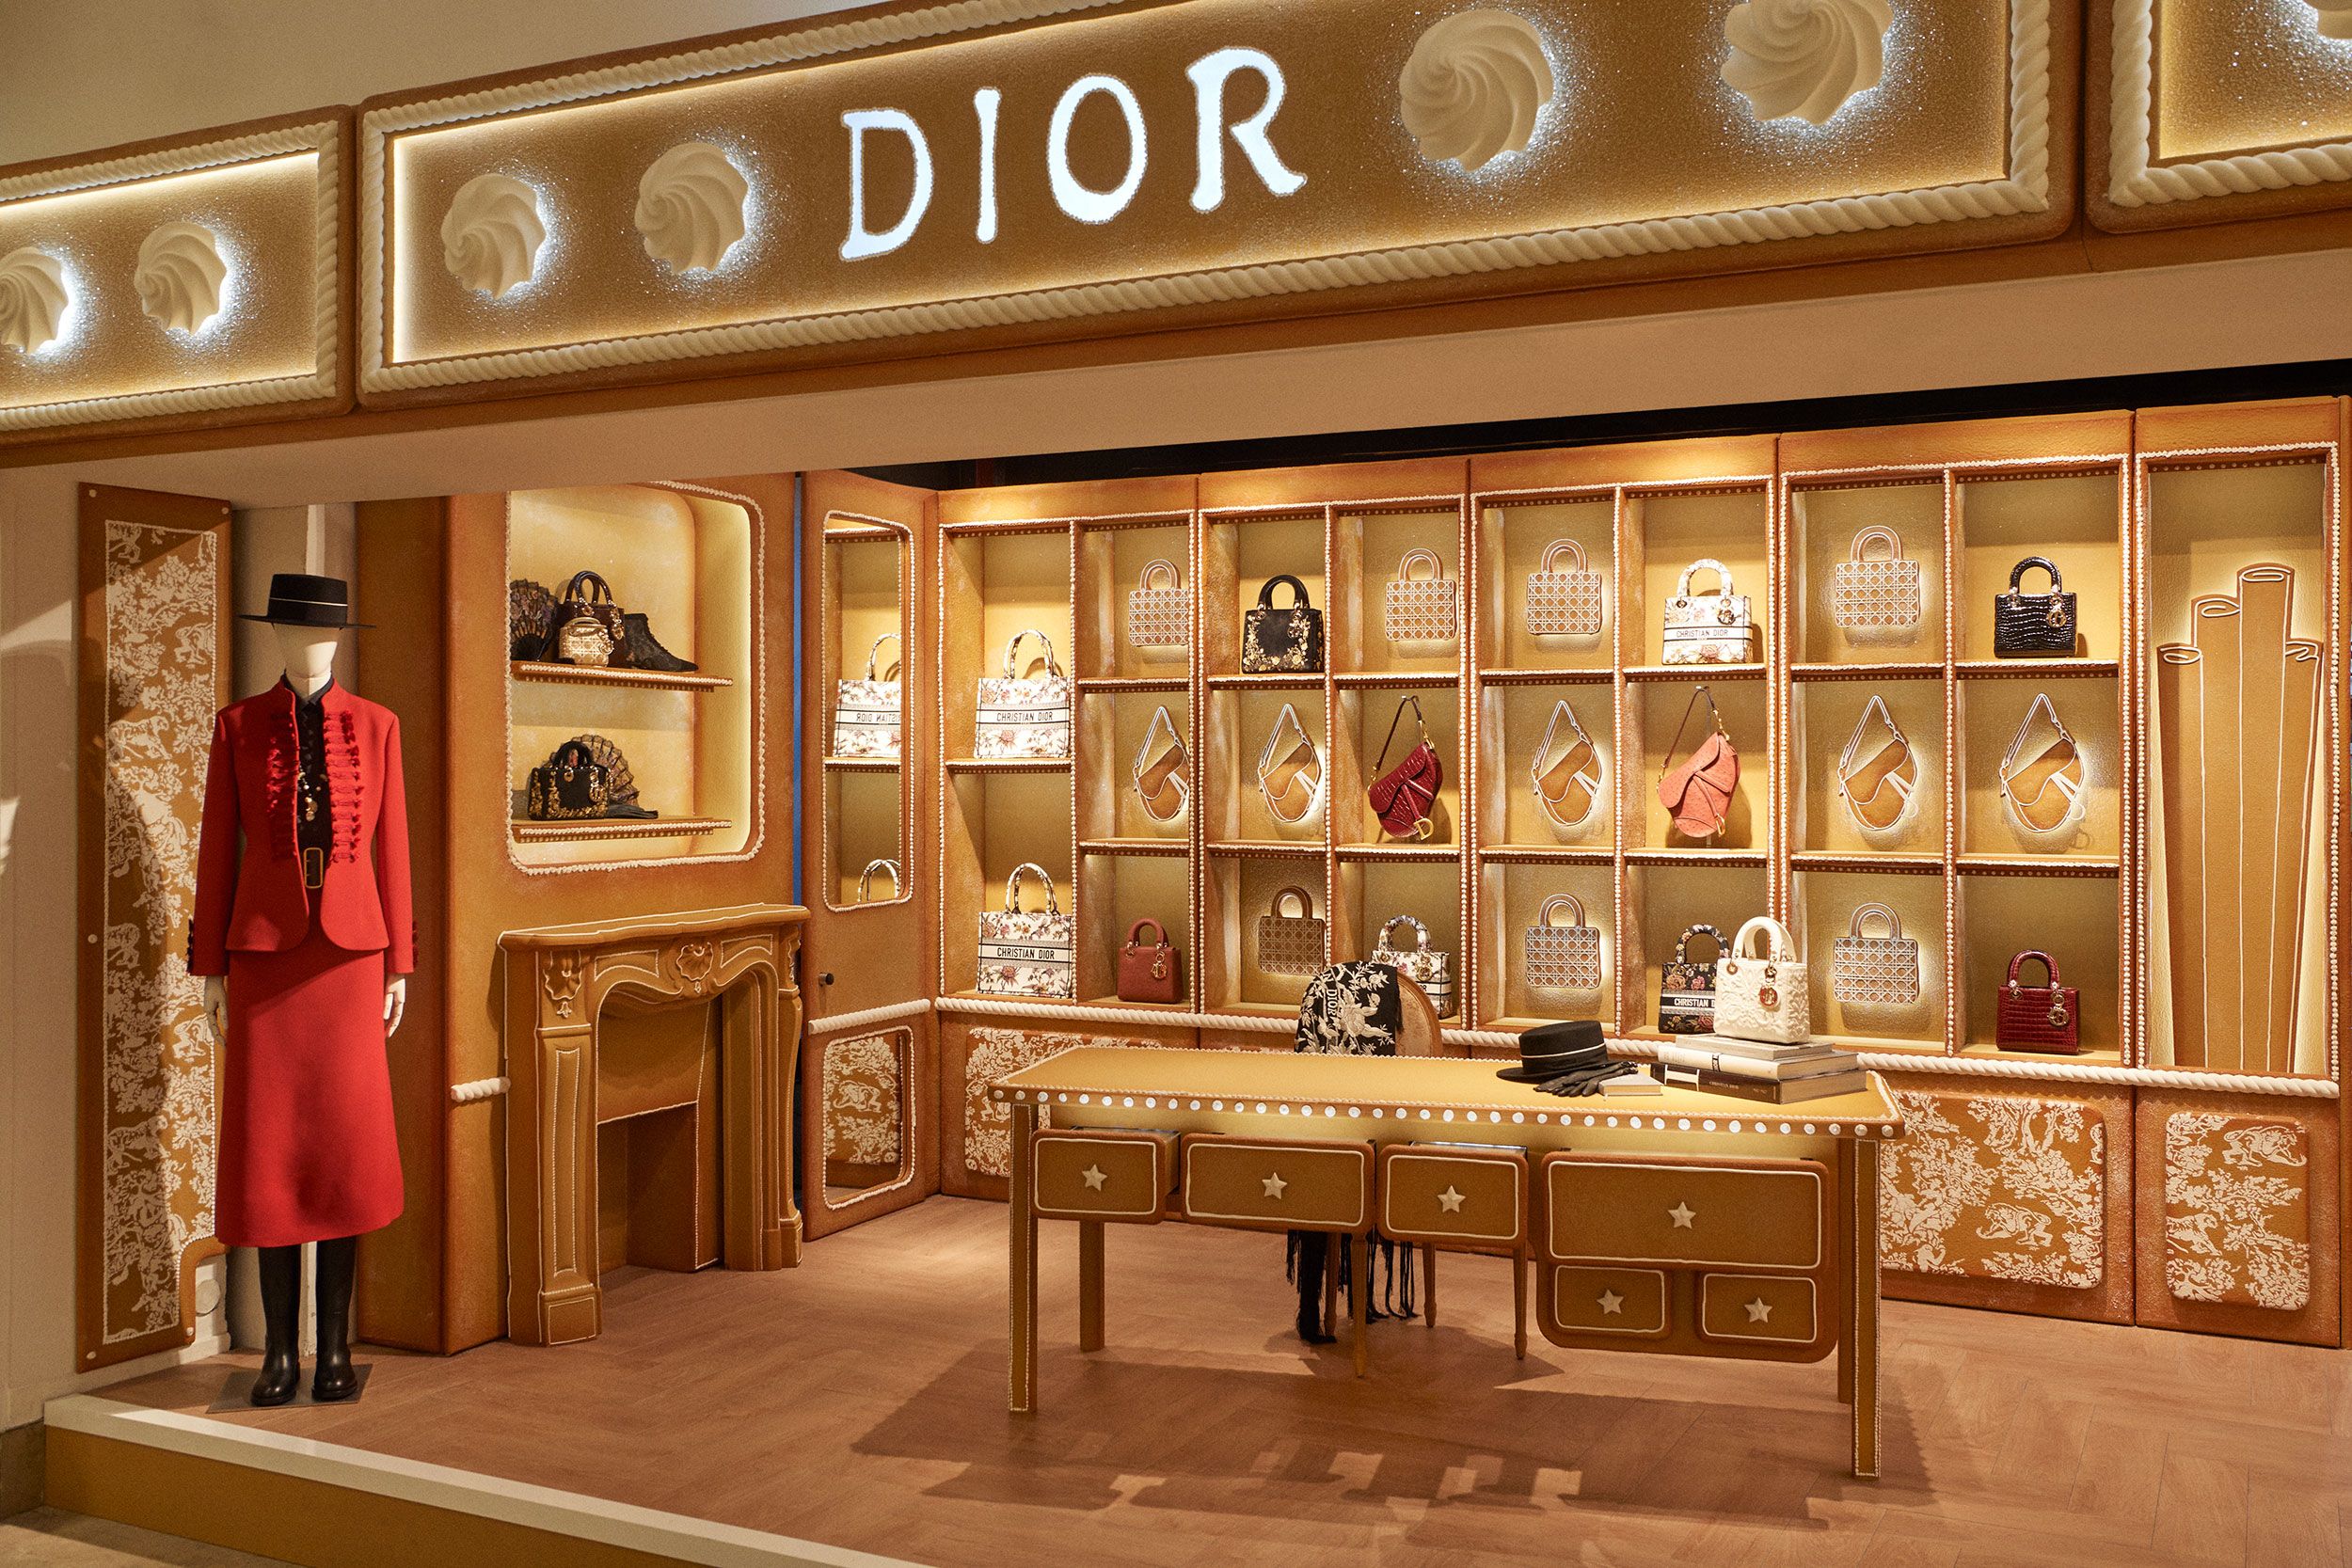 Dior takes over Harrods with dramatic Paris-inspired pop-up